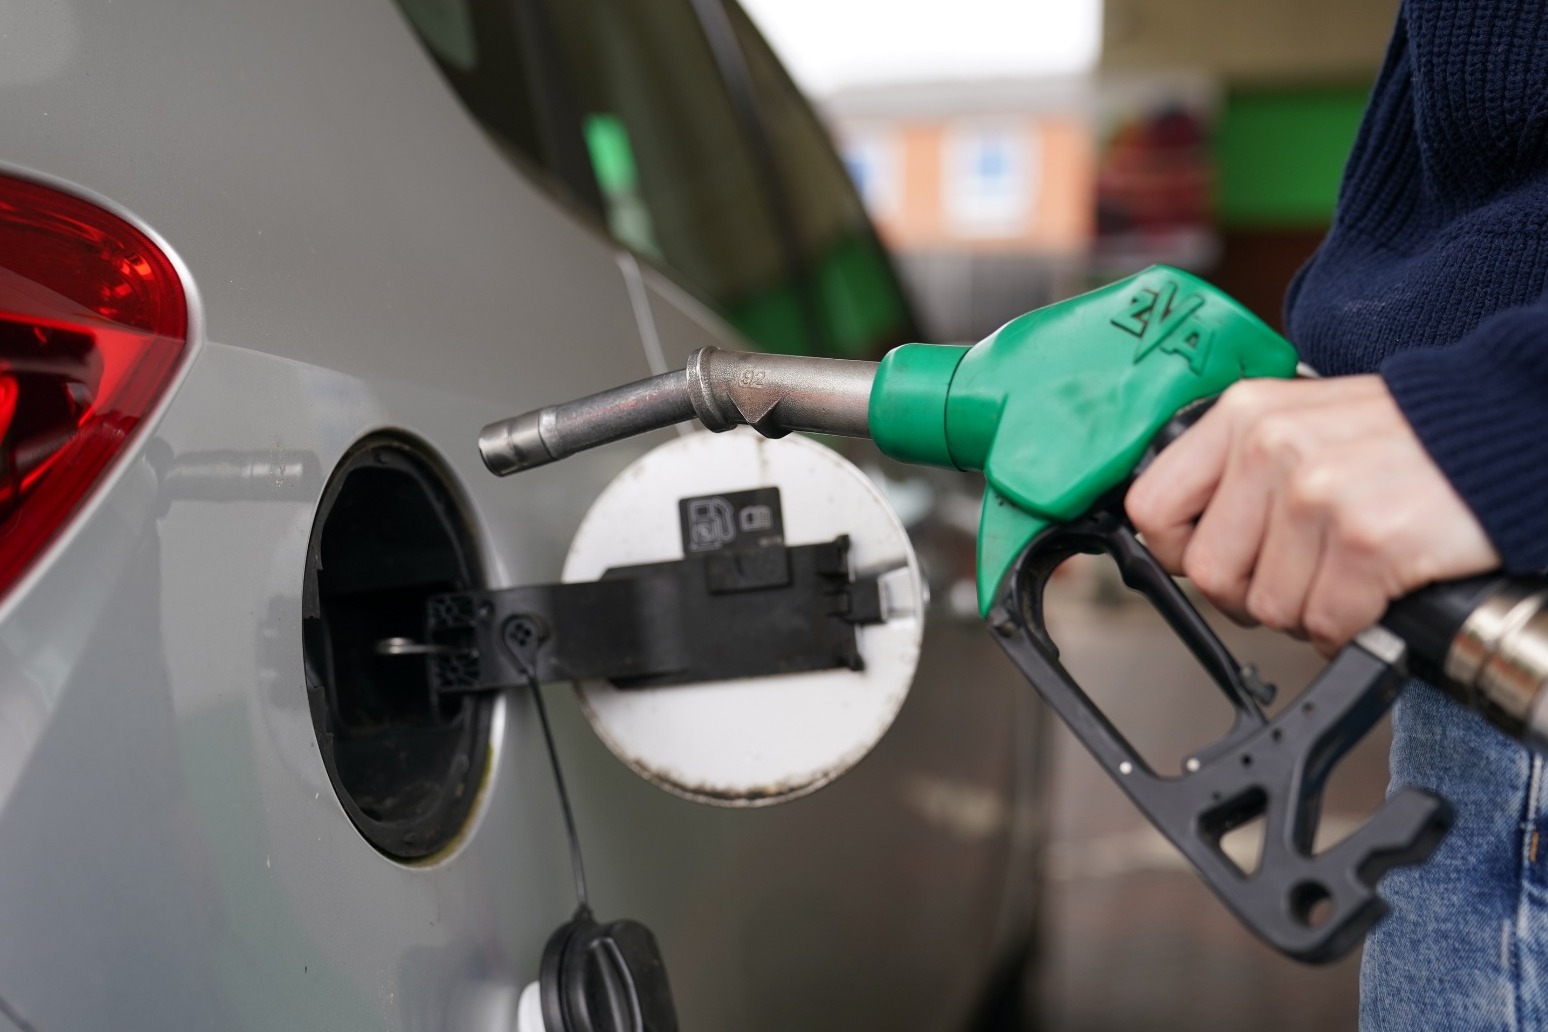 Fuel prices up 10p per litre since start of year 